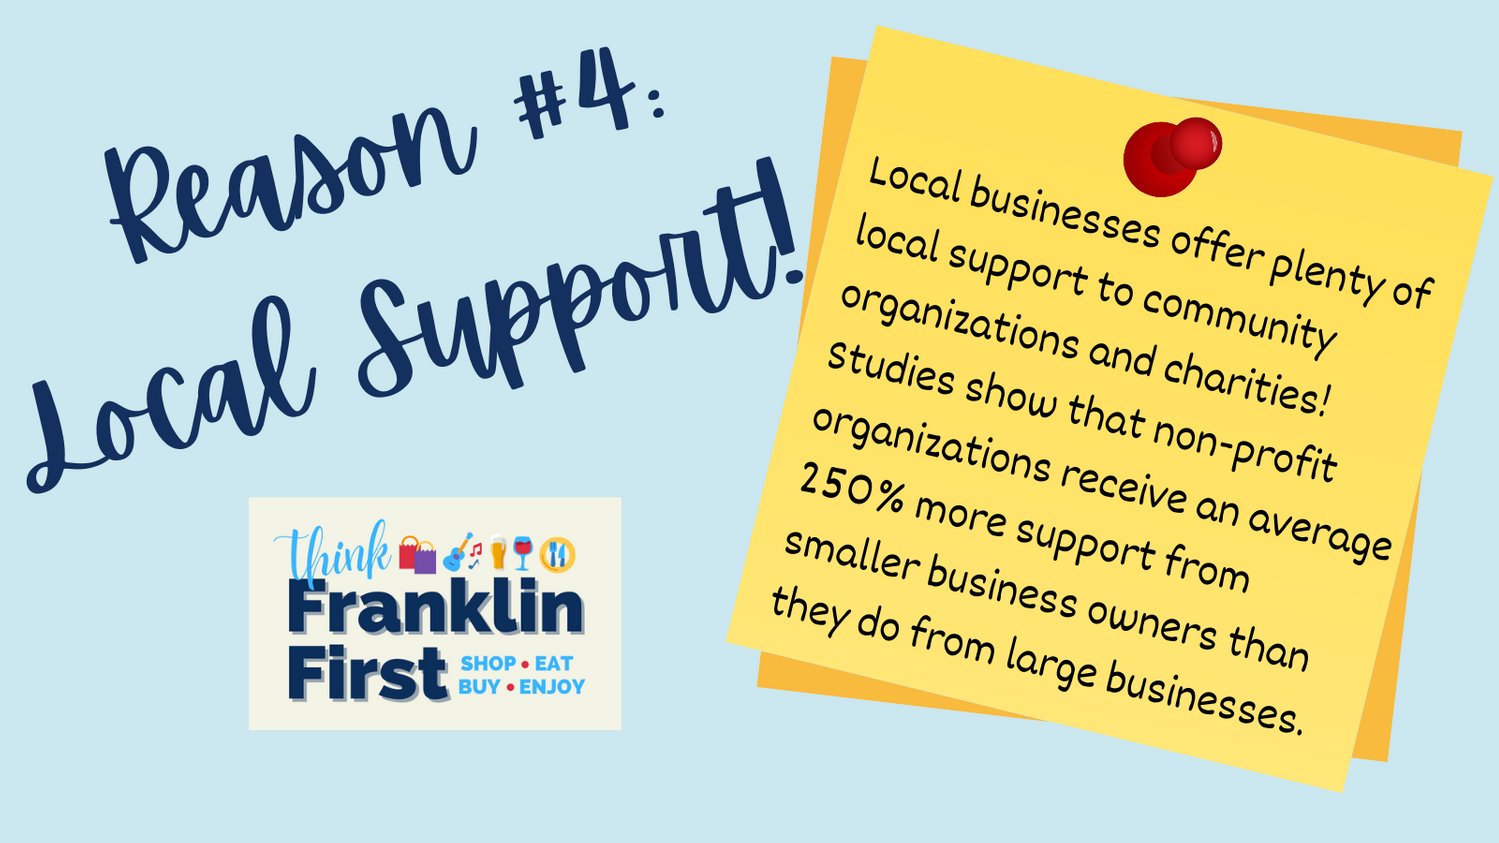 Reason #4 to #ThinkFranklinFirst